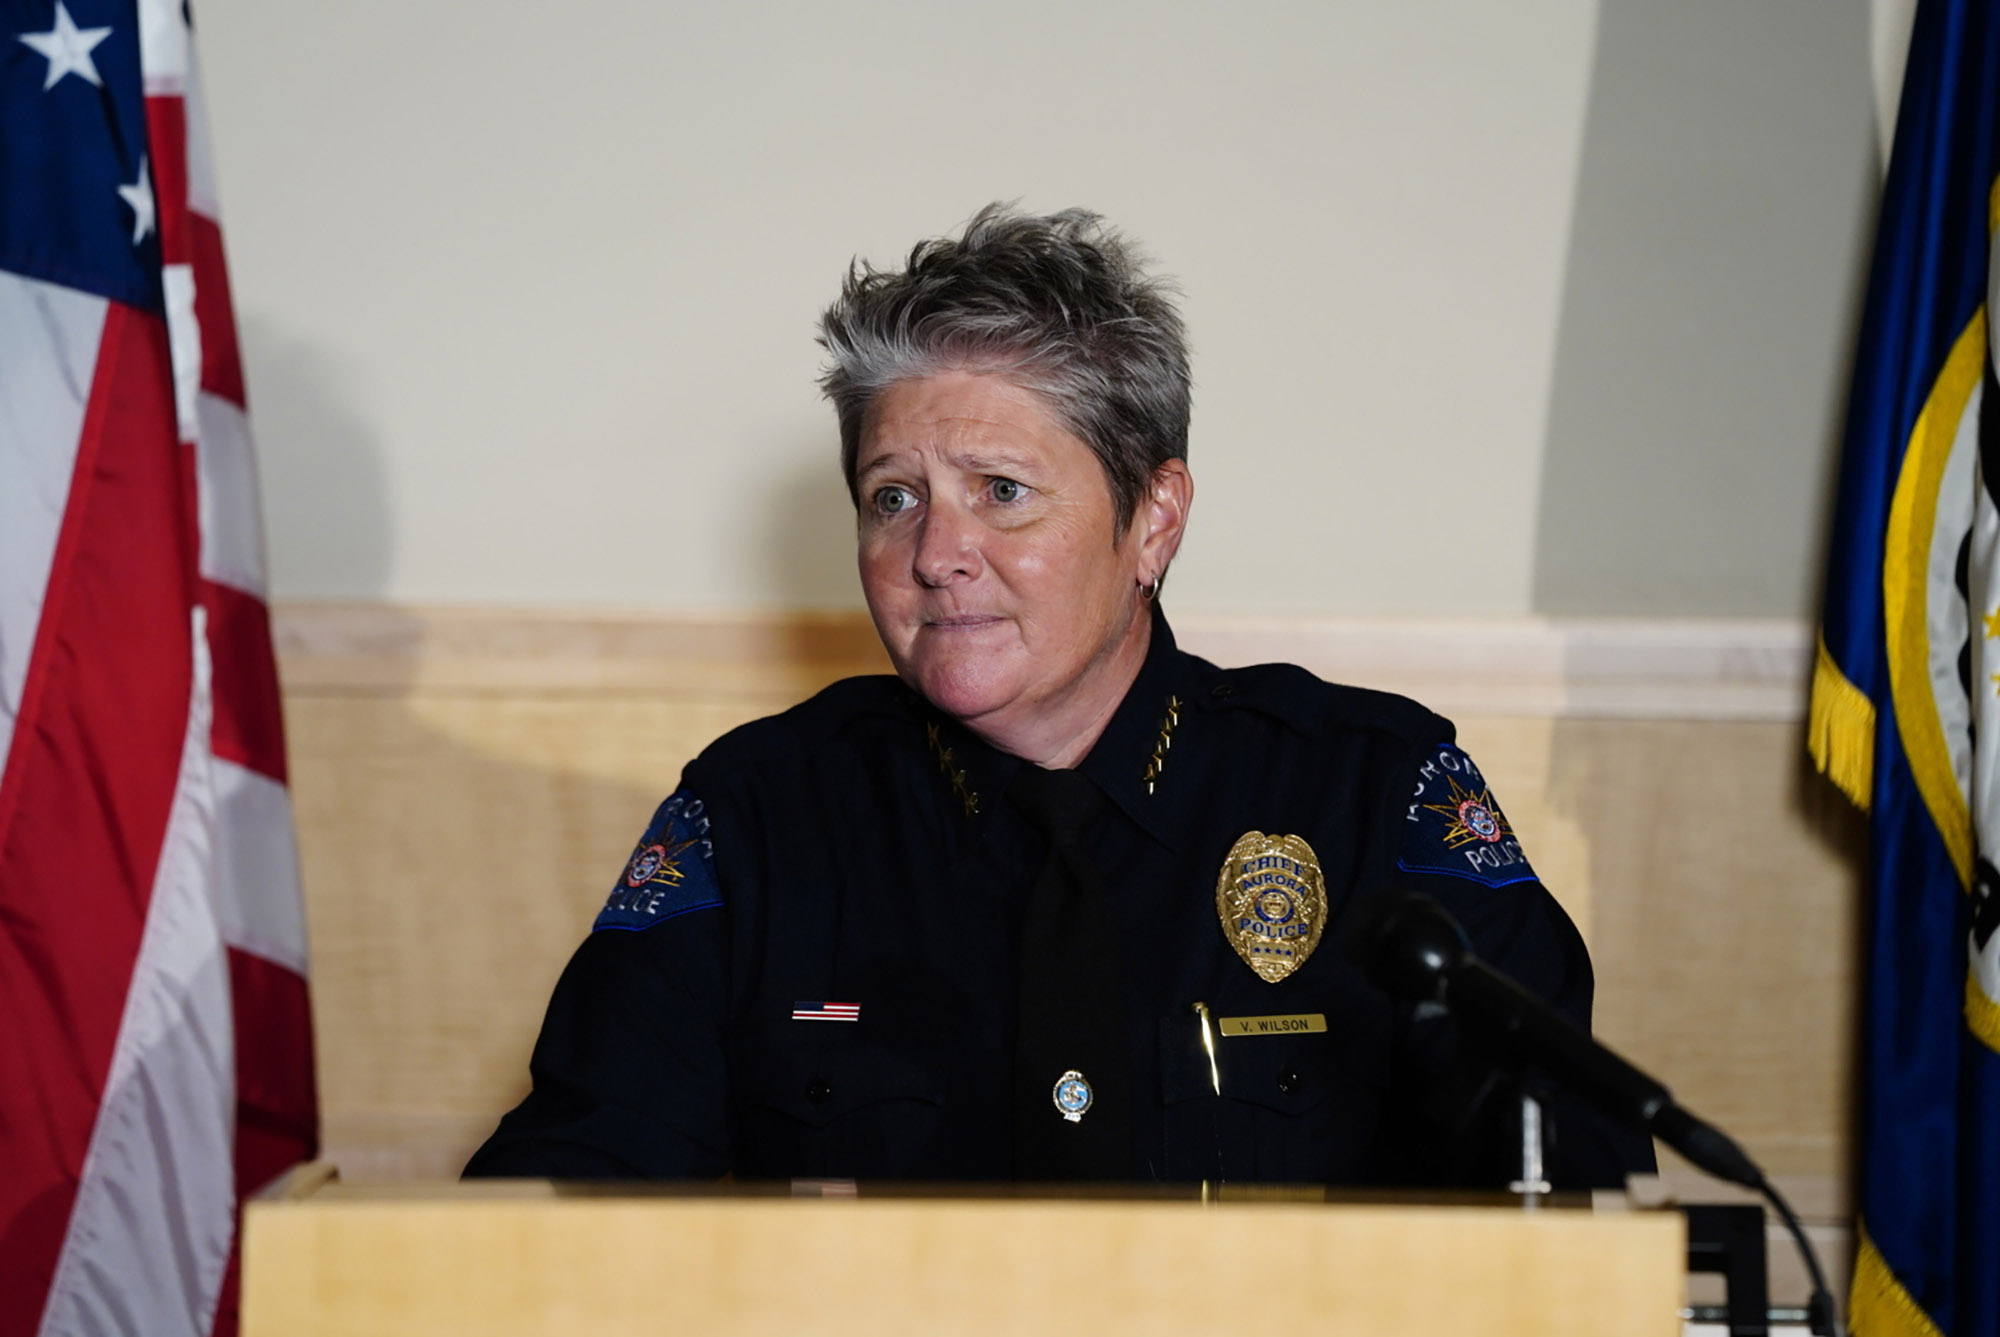 PHOTO: In this July 3, 2020, file photo, then-Aurora Police Department Interim Chief Vanessa Wilson speaks during a press conference in Aurora, Colo.